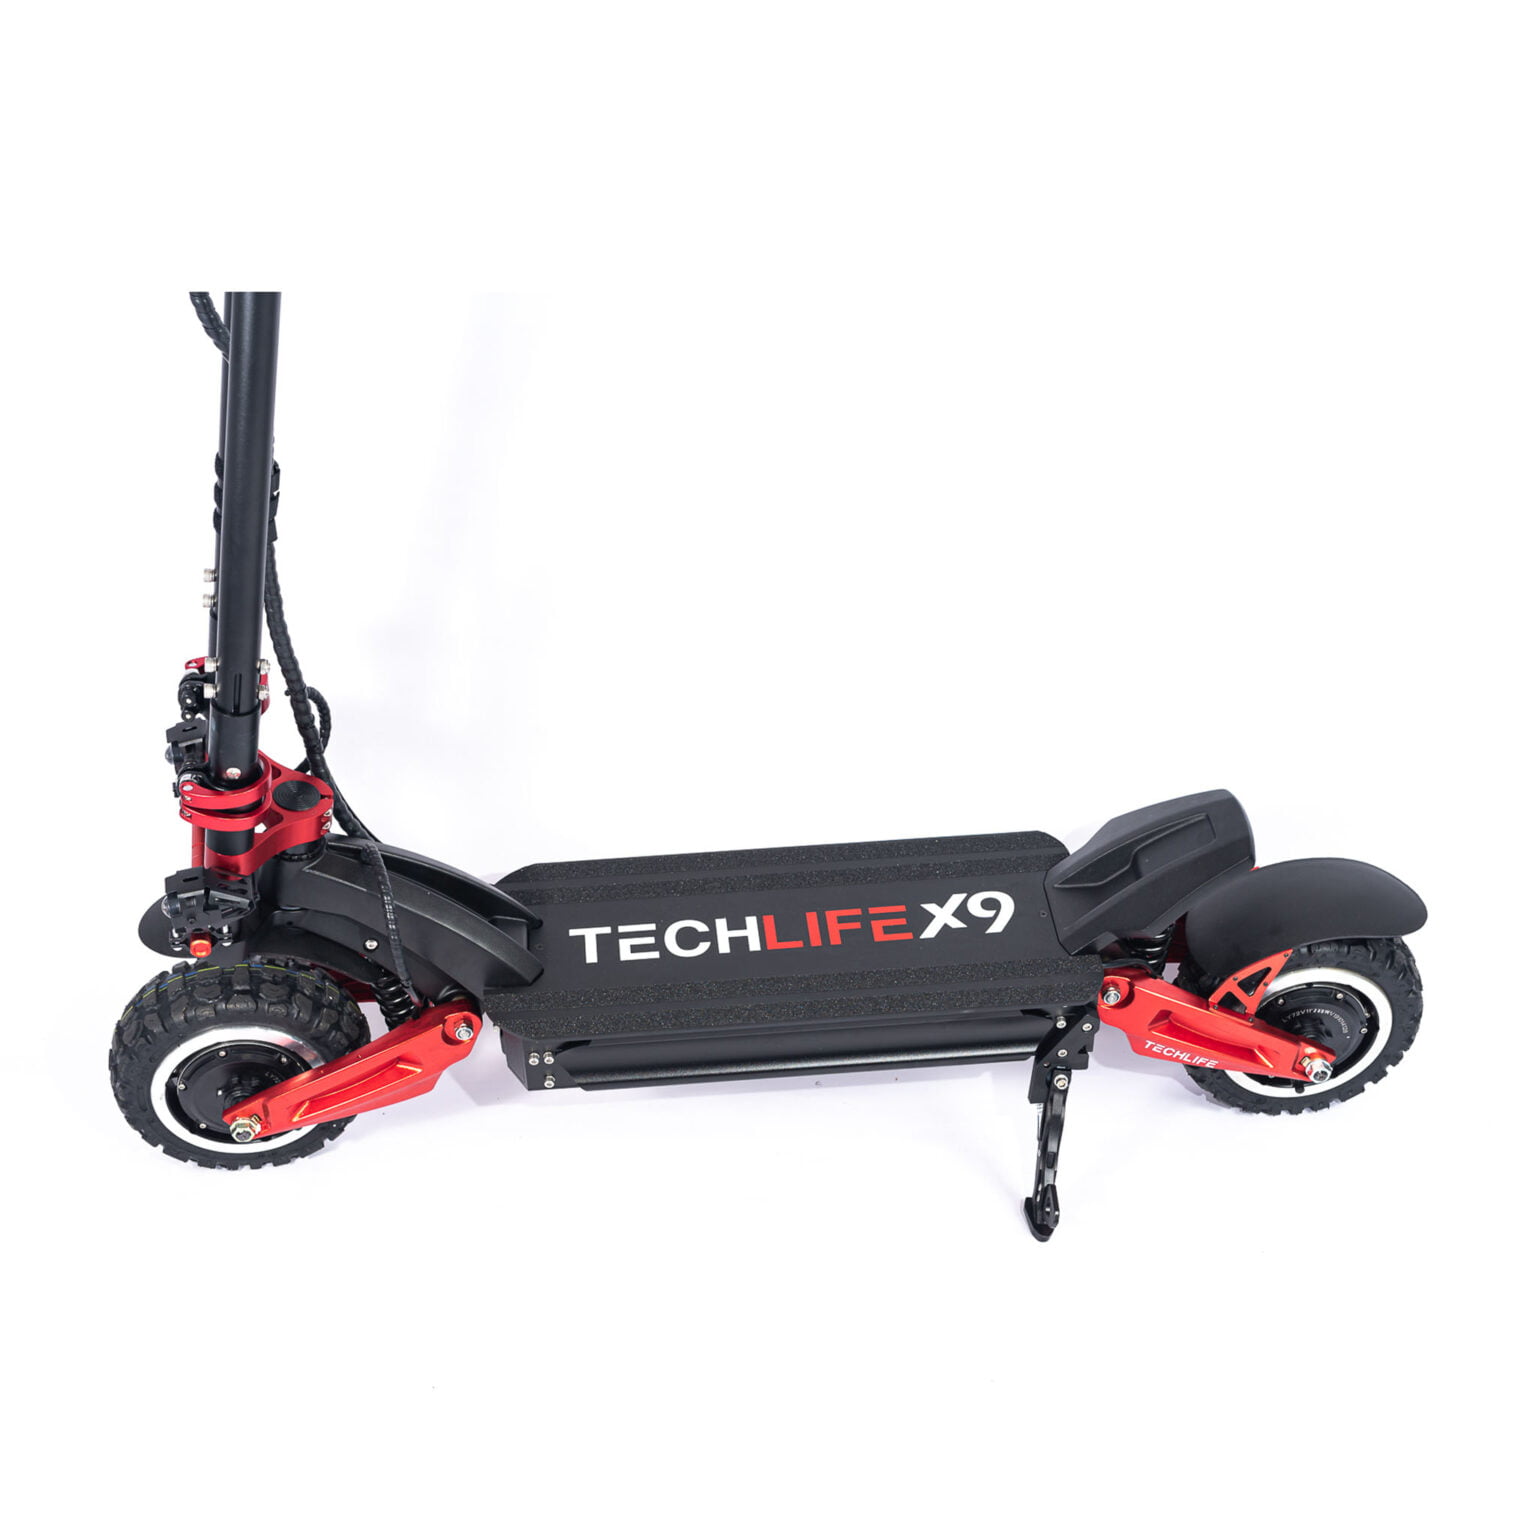 Techlife X9 electric scooter, dual motor, 6000 W 18